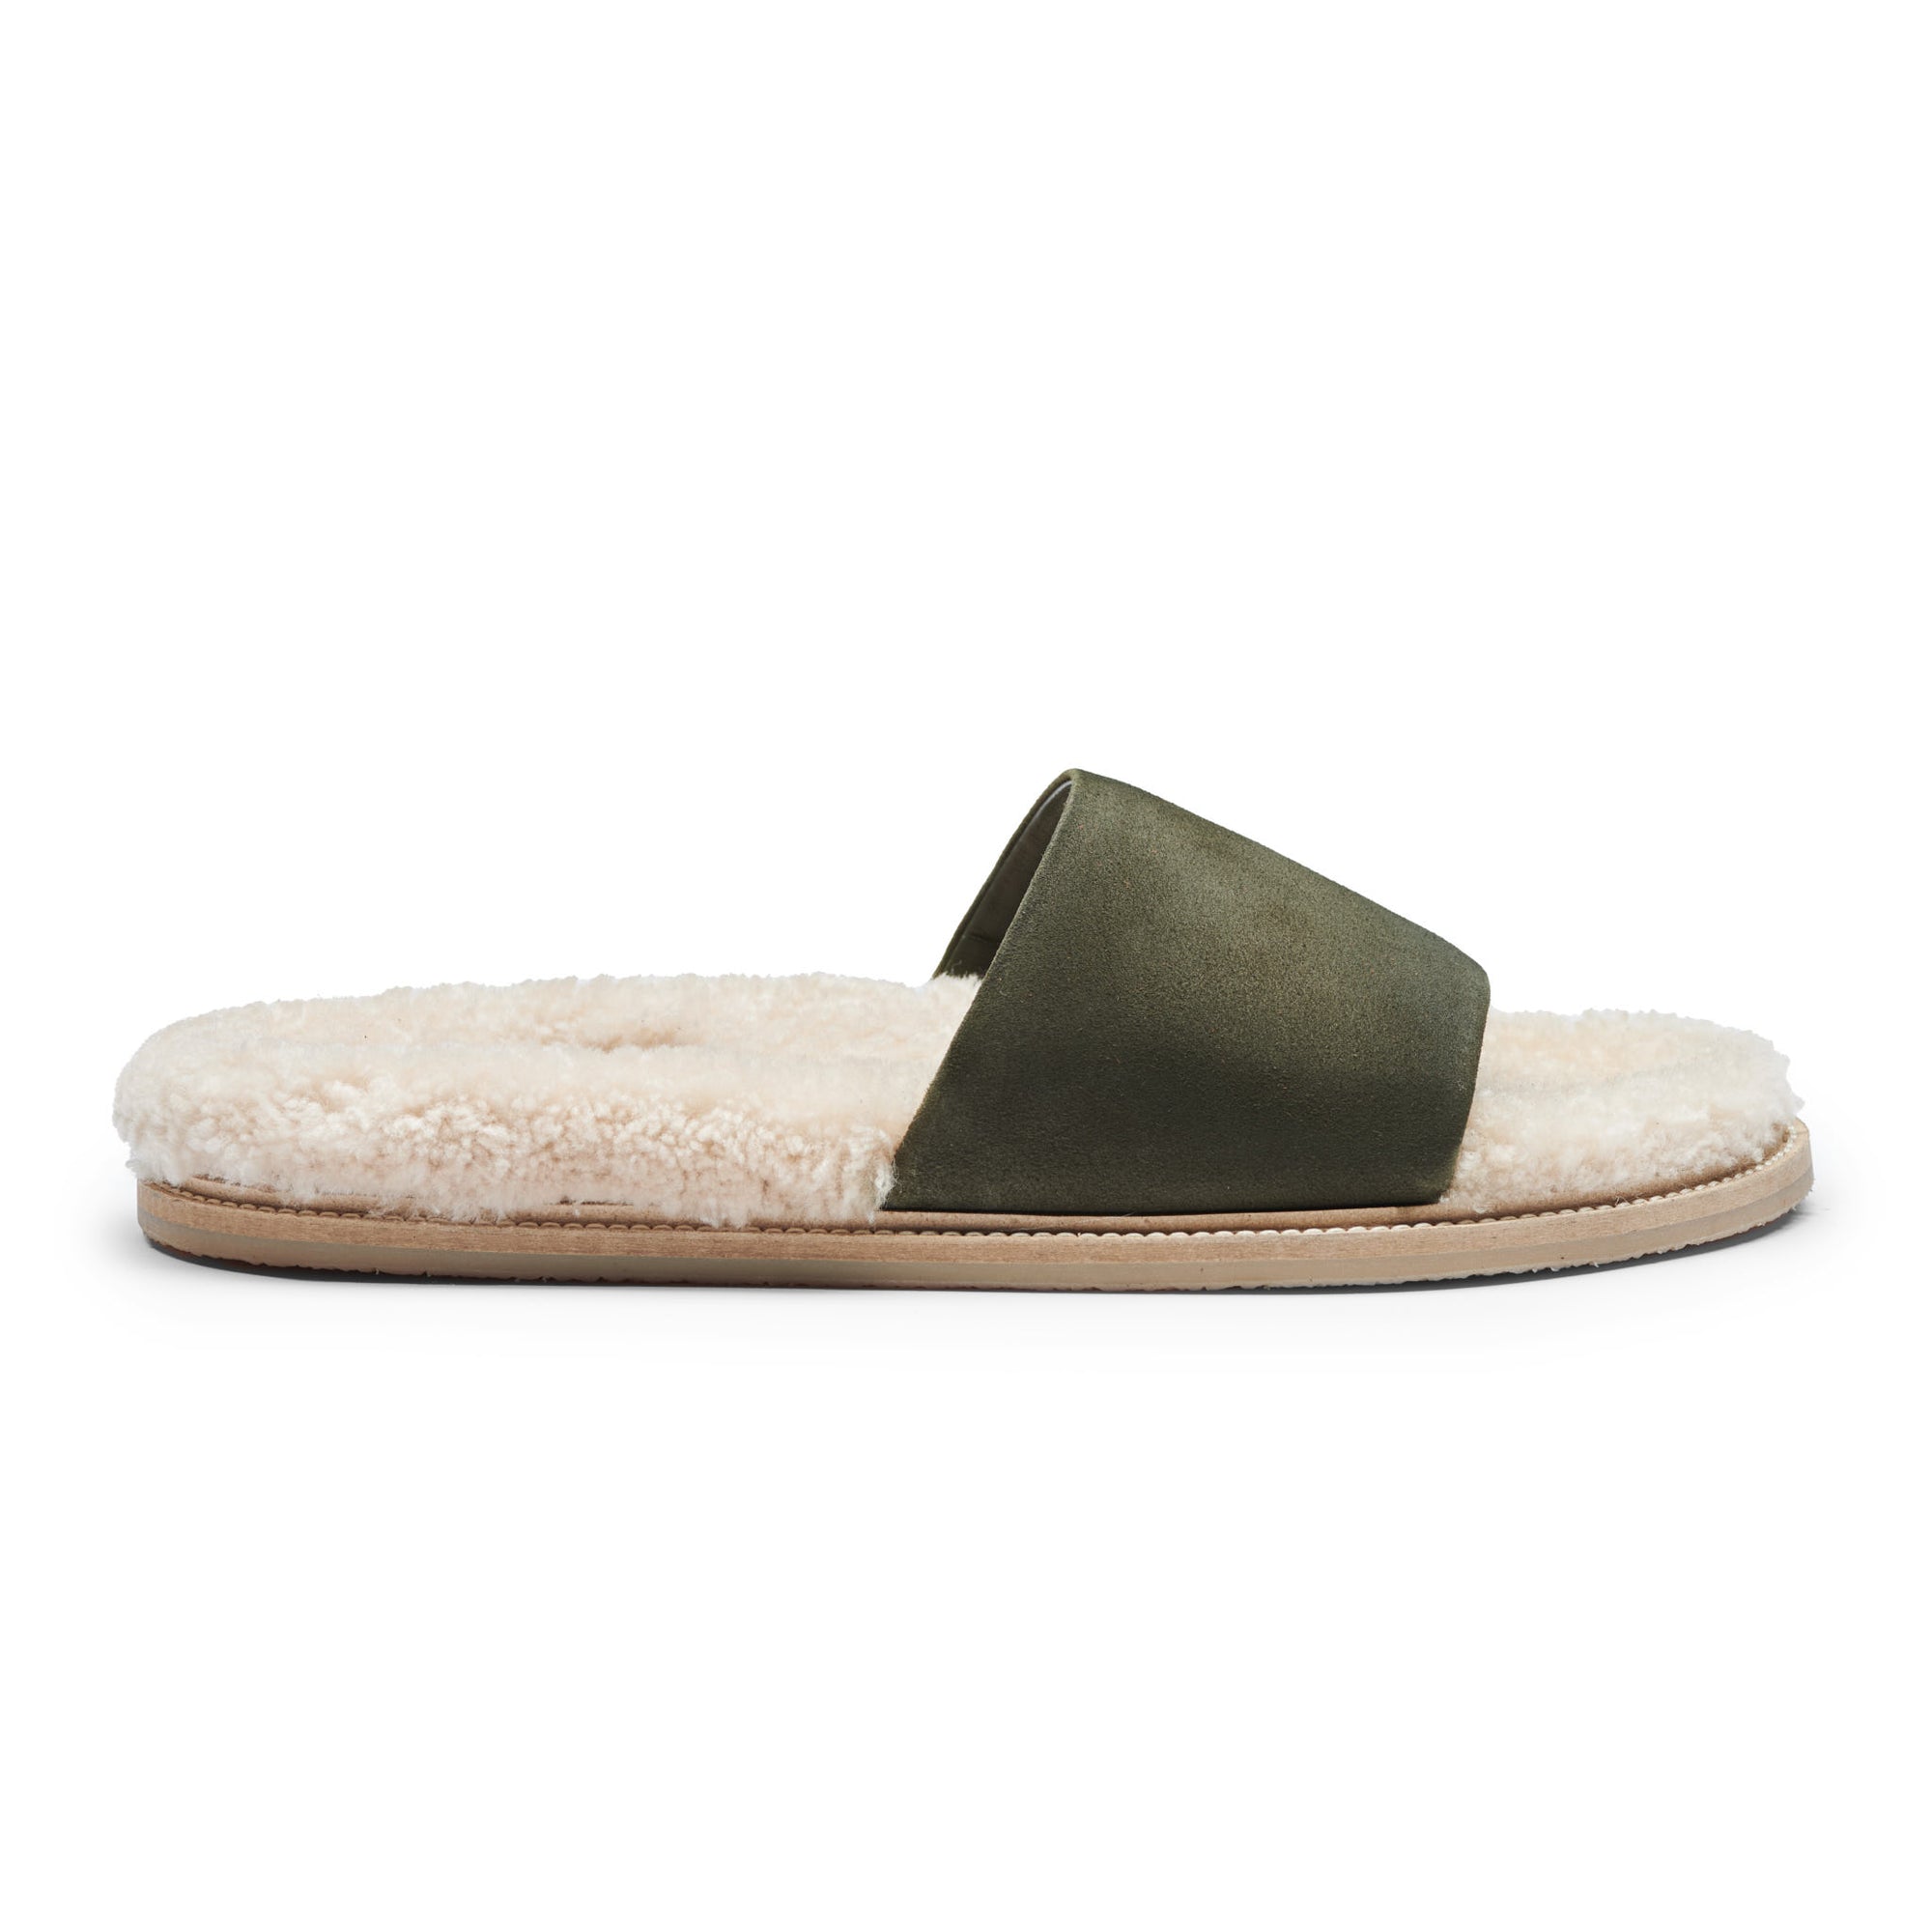 Inabo Men's Patio slipper in army green suede and white shearling in profile